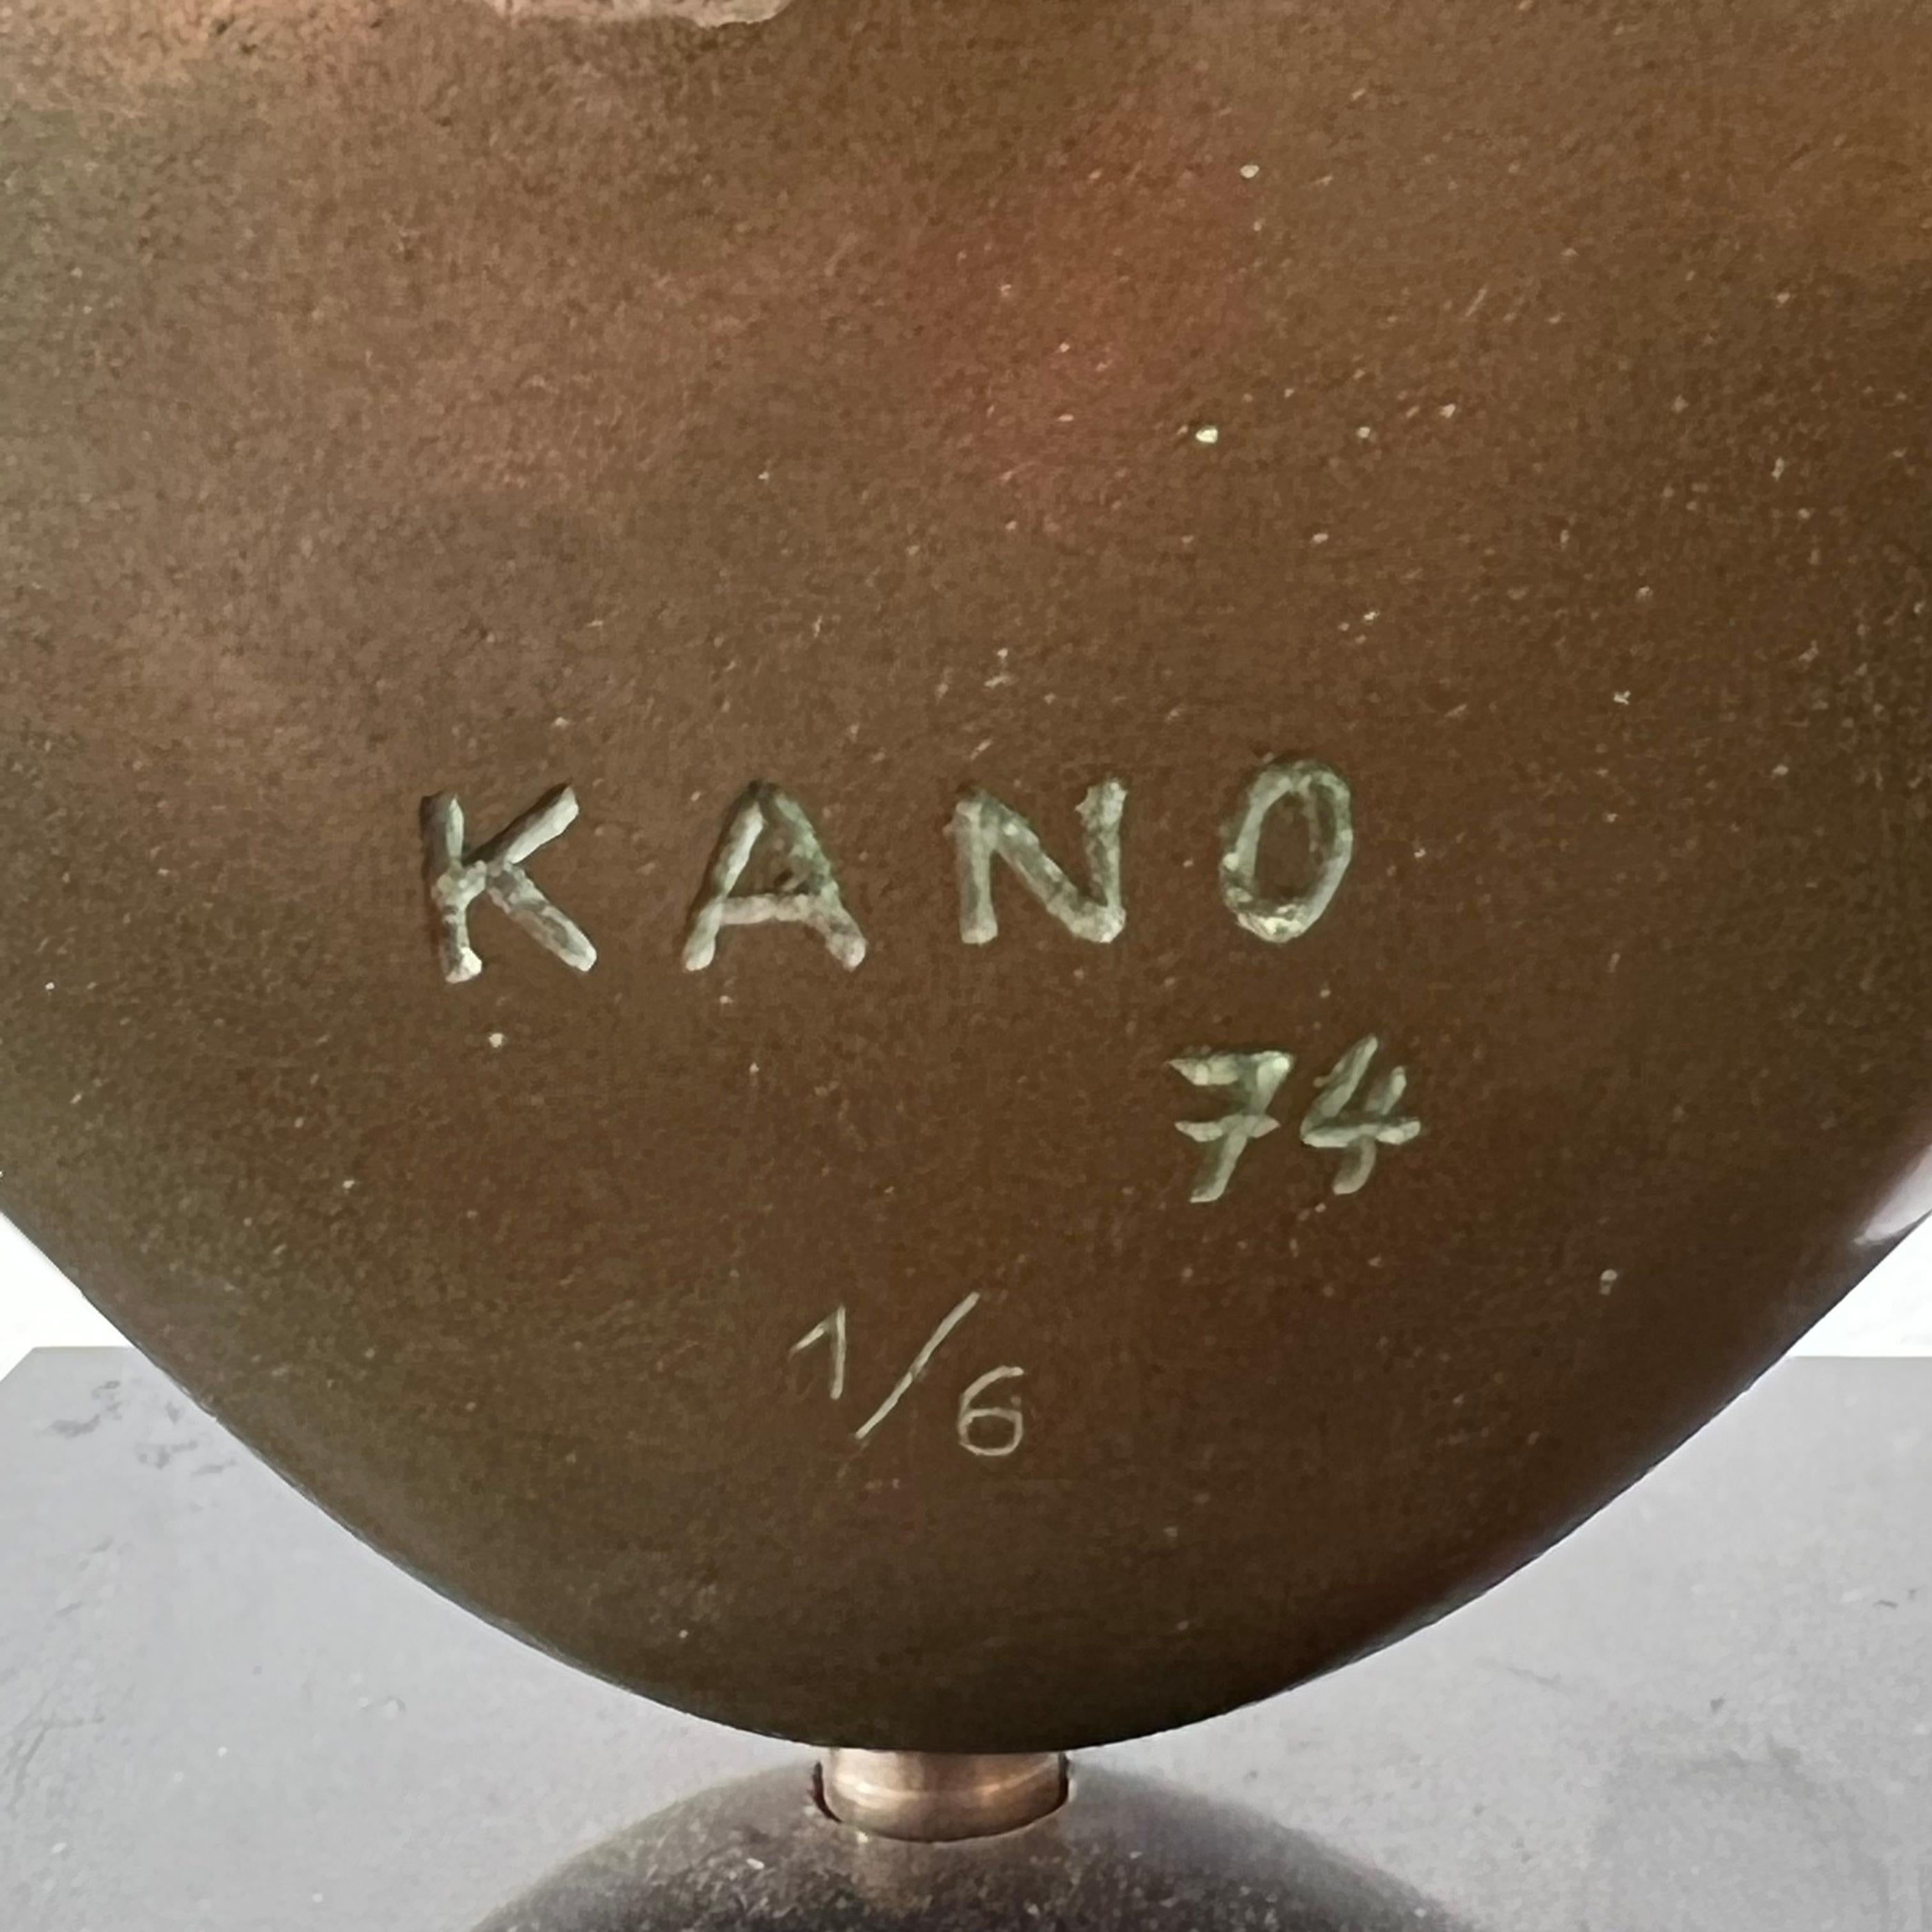 Minoru Kano abstract bronze, signed and dated.

Beautiful exemple of his abstract works.


Kanō Minoru 嘉野稔 (1930 Tokyo - 2007 Paris) is a Post-War Japanese abstract sculptor. Lise Cormery writes his biography in her book 